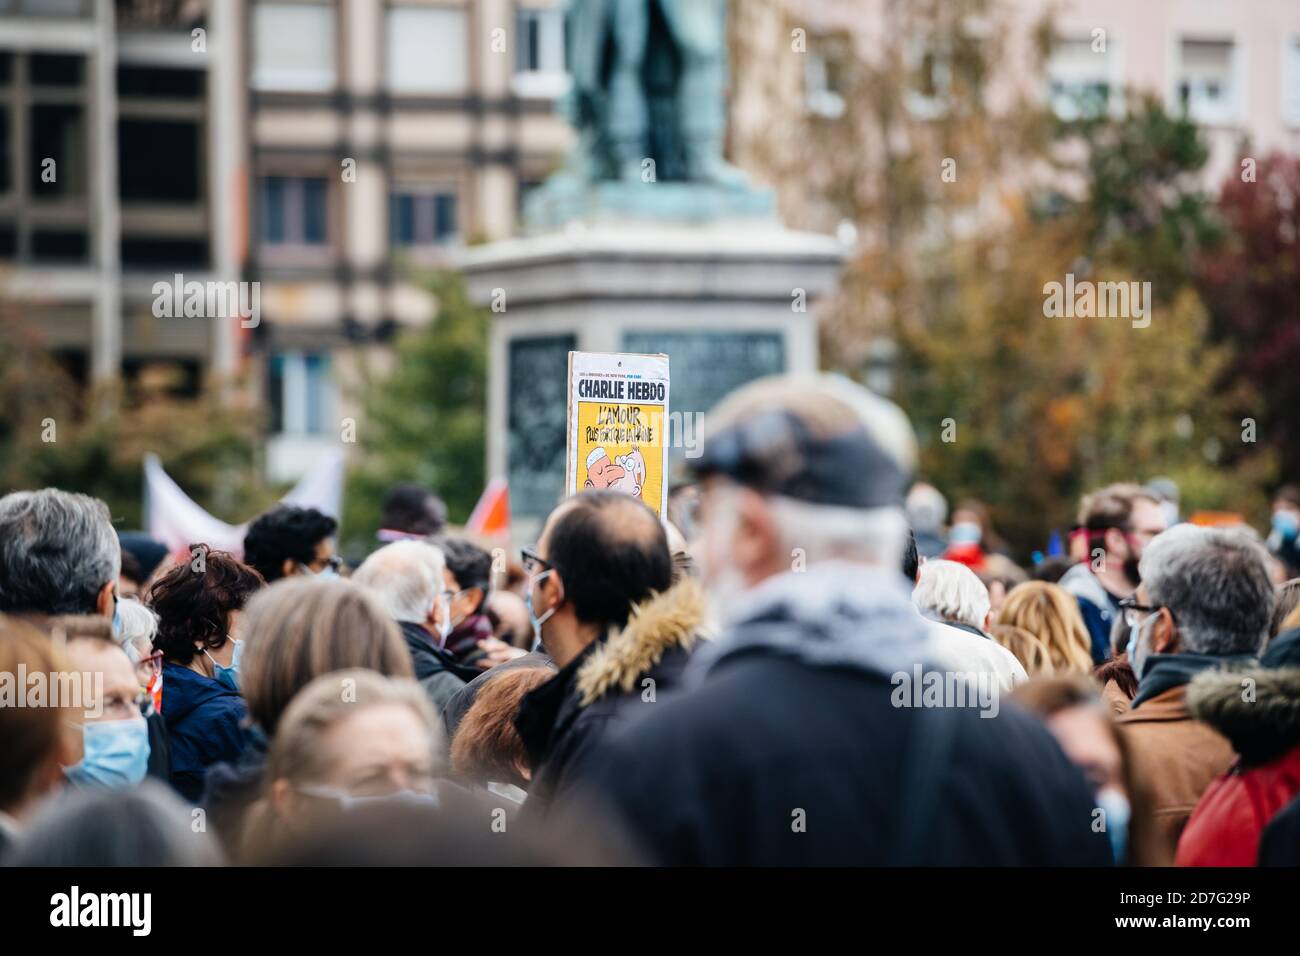 Strasbourg, France - Oct 19, 2020: Man holding Charlie Hebdo caricature Place Kleber to pay tribute to history teacher Samuel Paty, beheaded on Oct 16th after showing caricatures of Prophet Muhammad in class Stock Photo